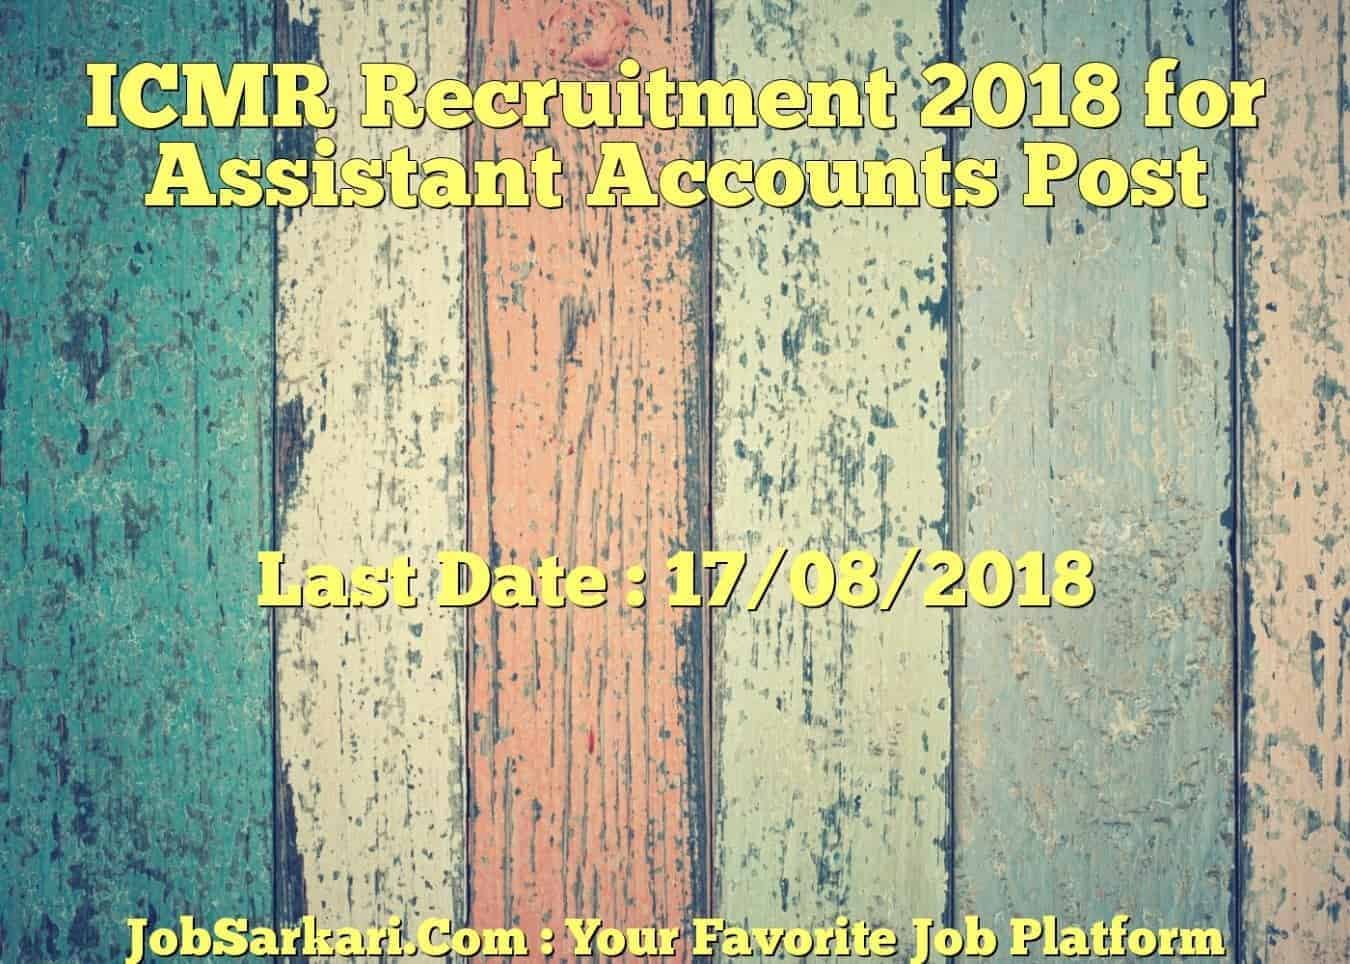 ICMR Recruitment 2018 for Assistant Accounts Post